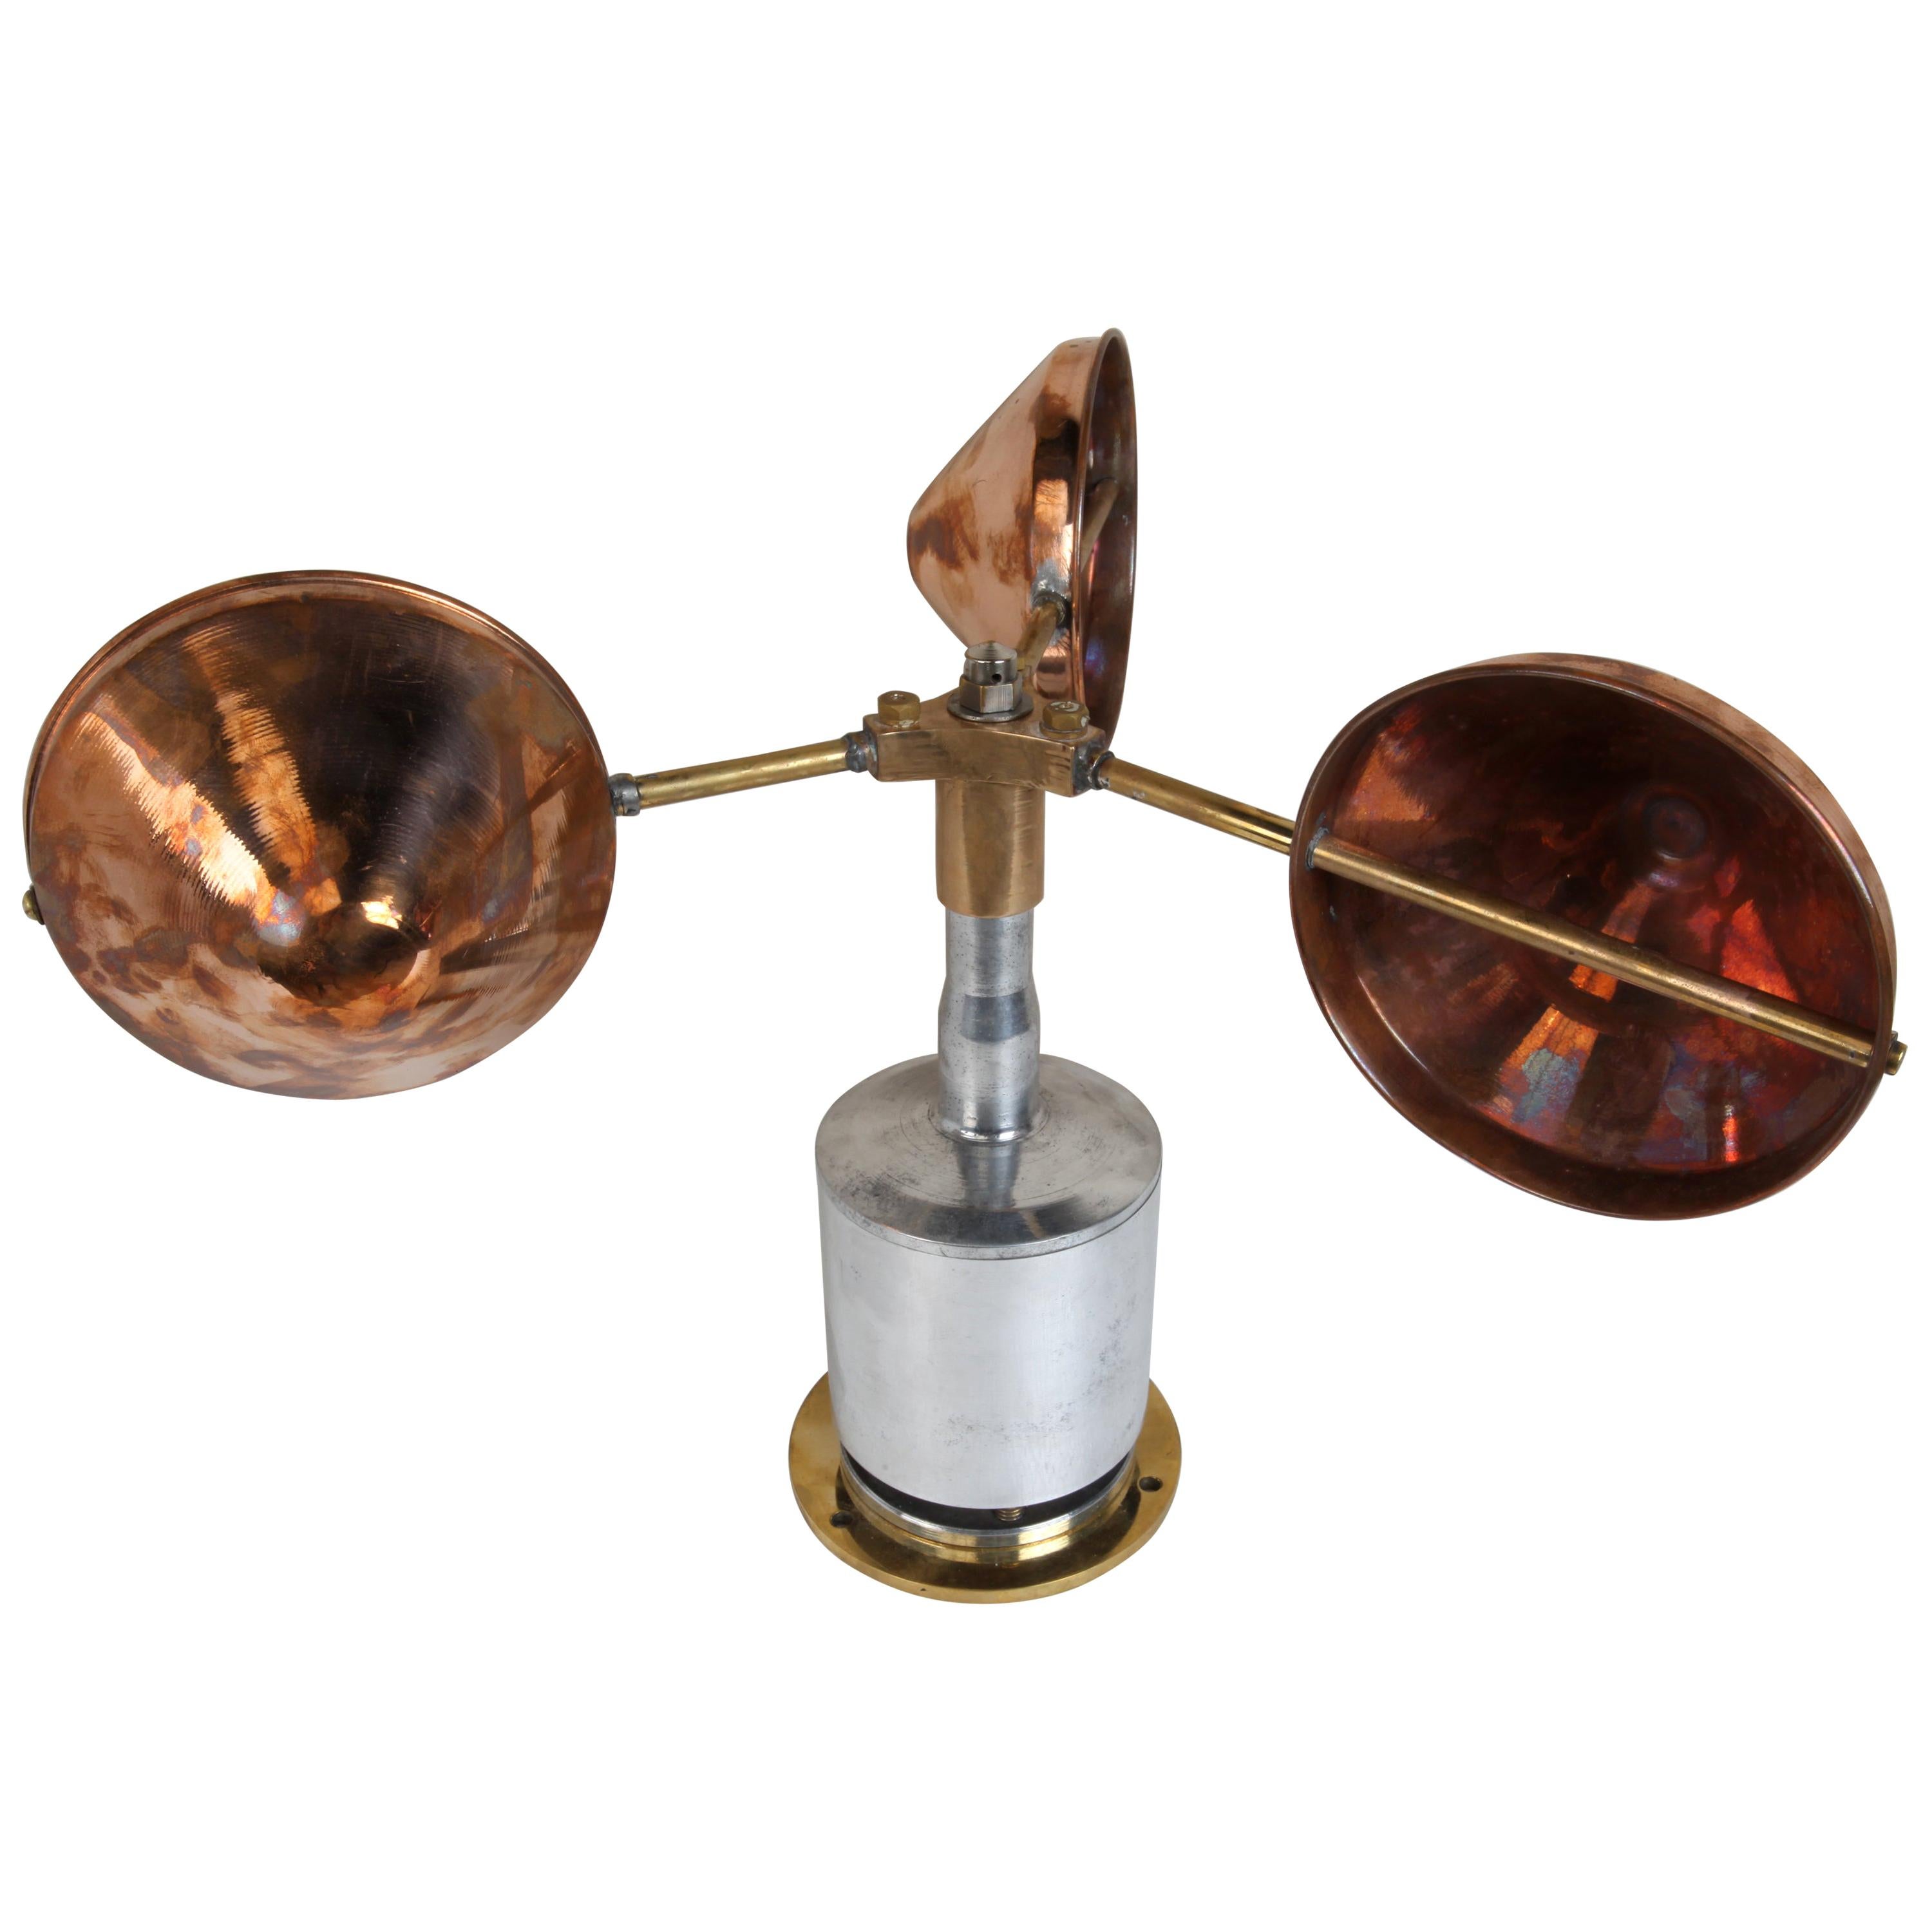 Copper, Brass and Chrome Ship's Anemometer, Midcentury